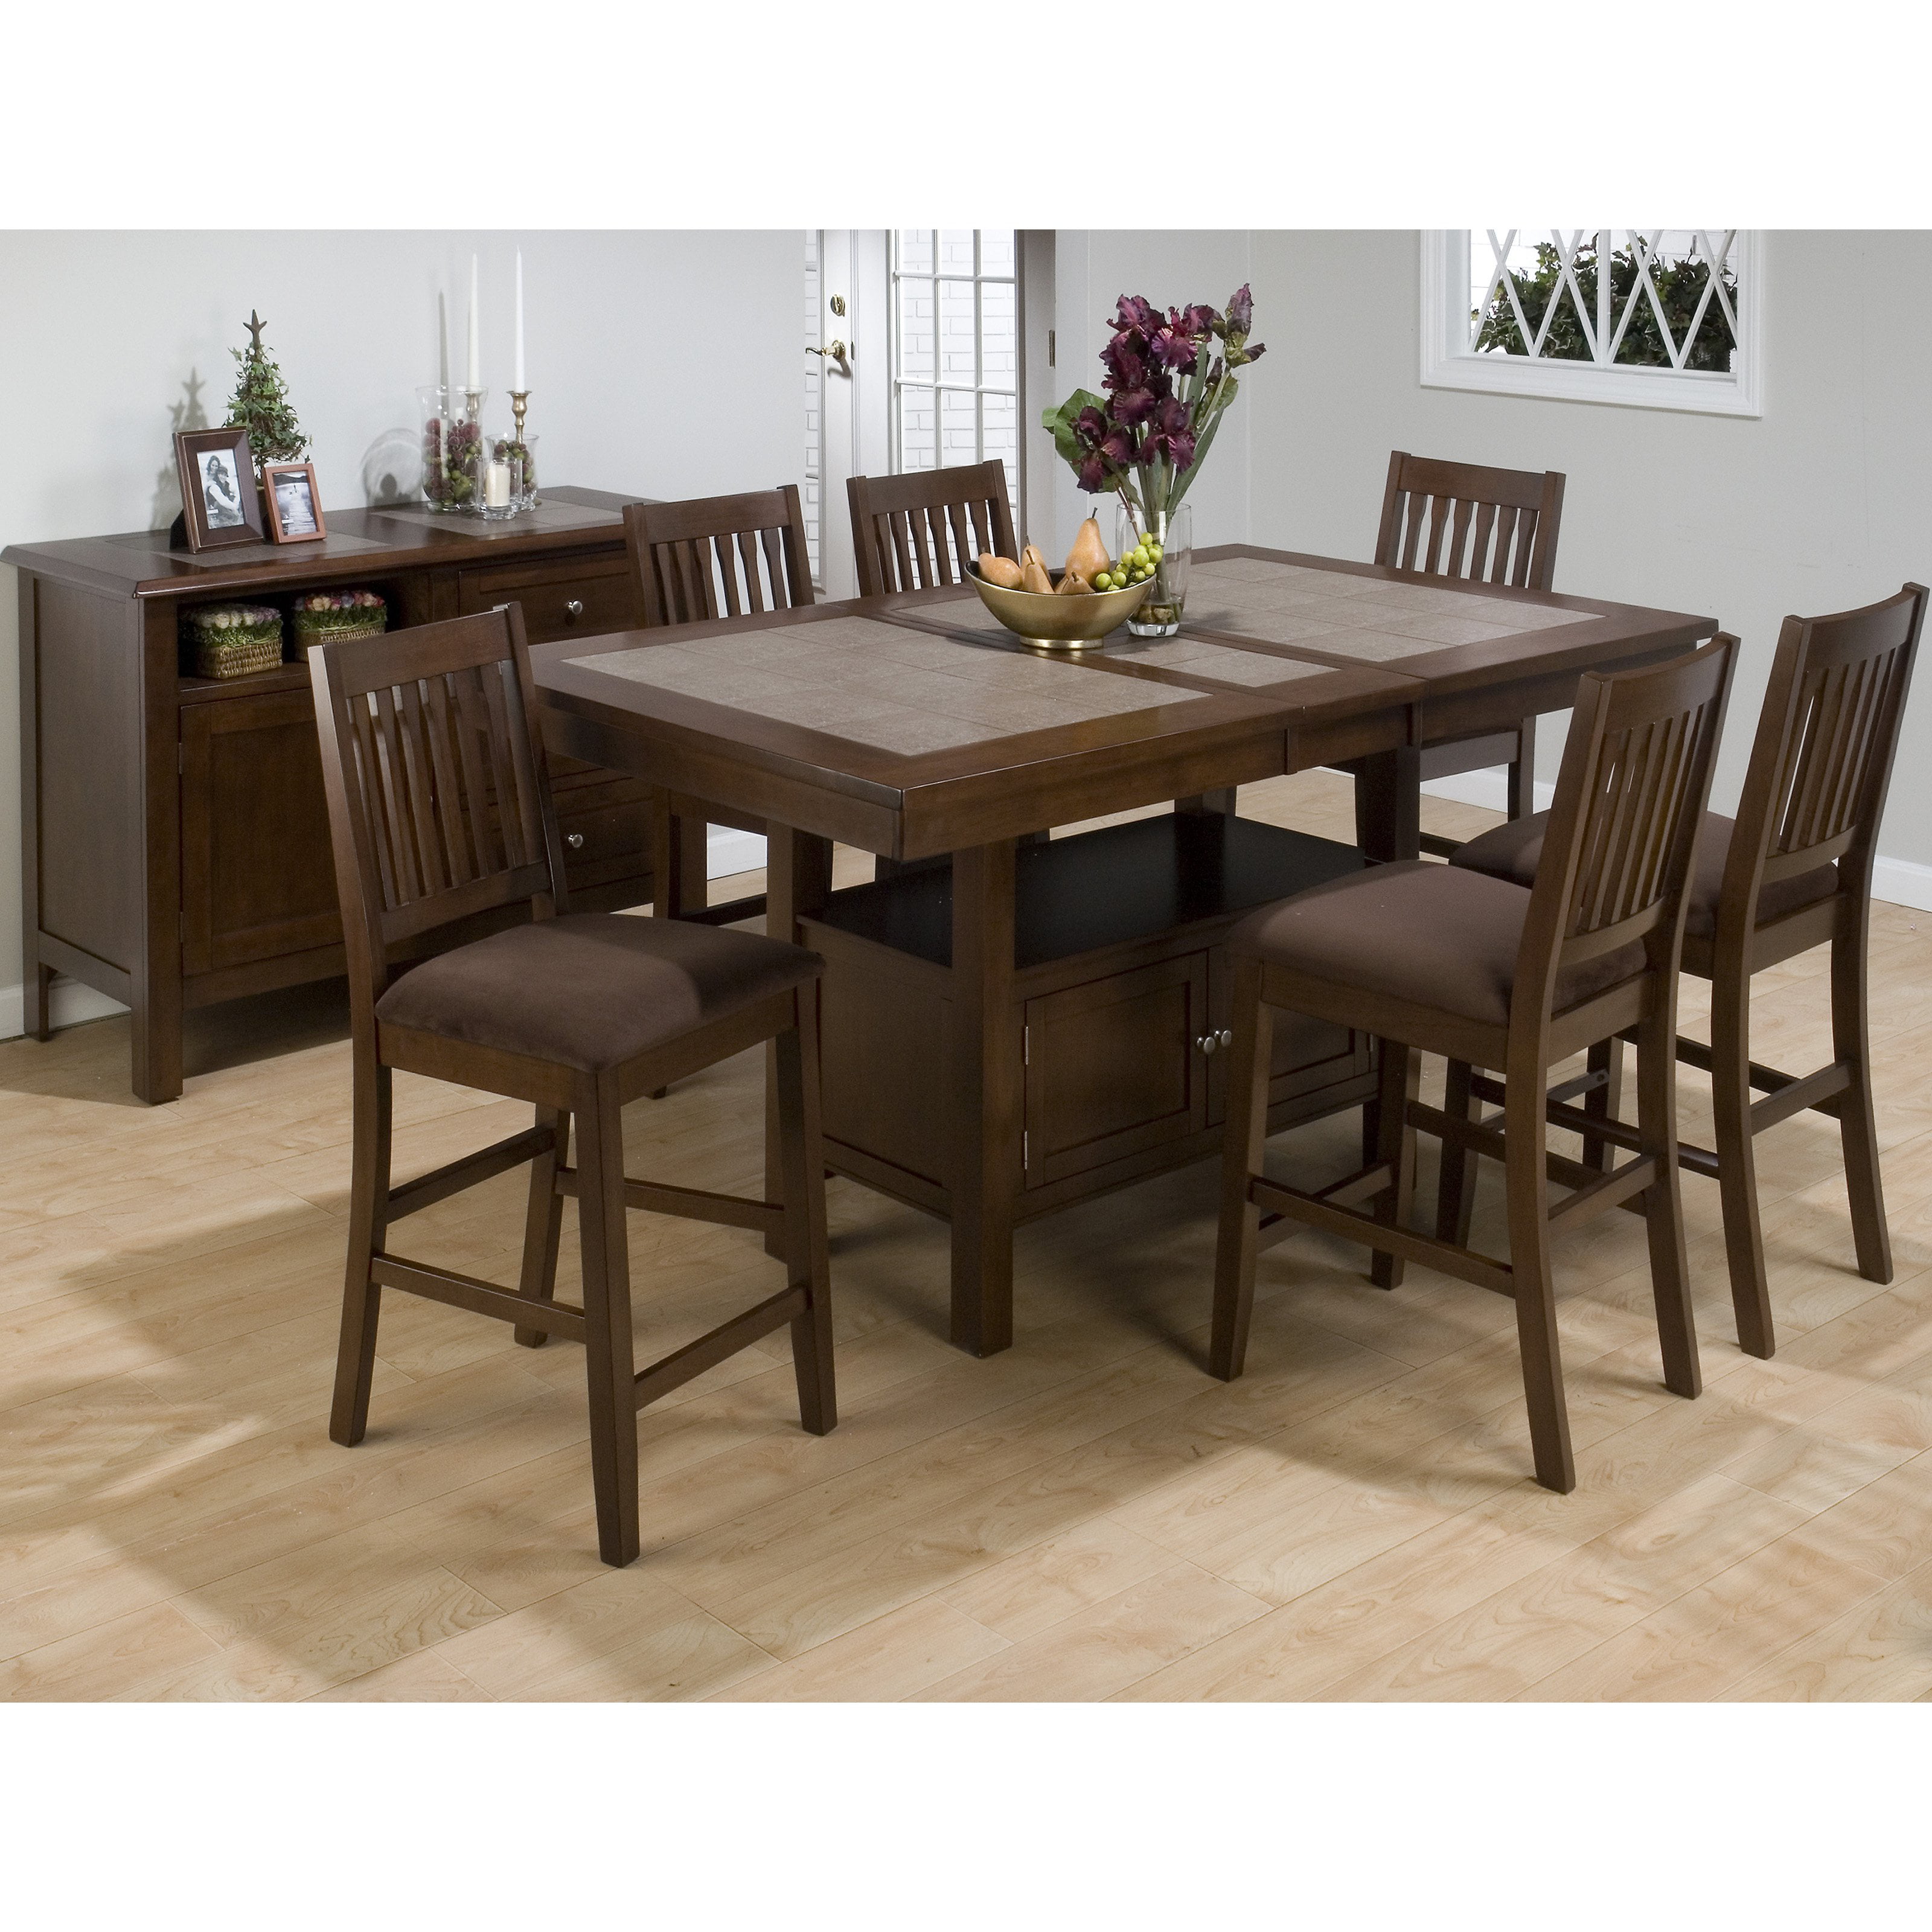 Jofran Trumbull 7 pc. Counter Height Dining Table Set - Dining Set Only